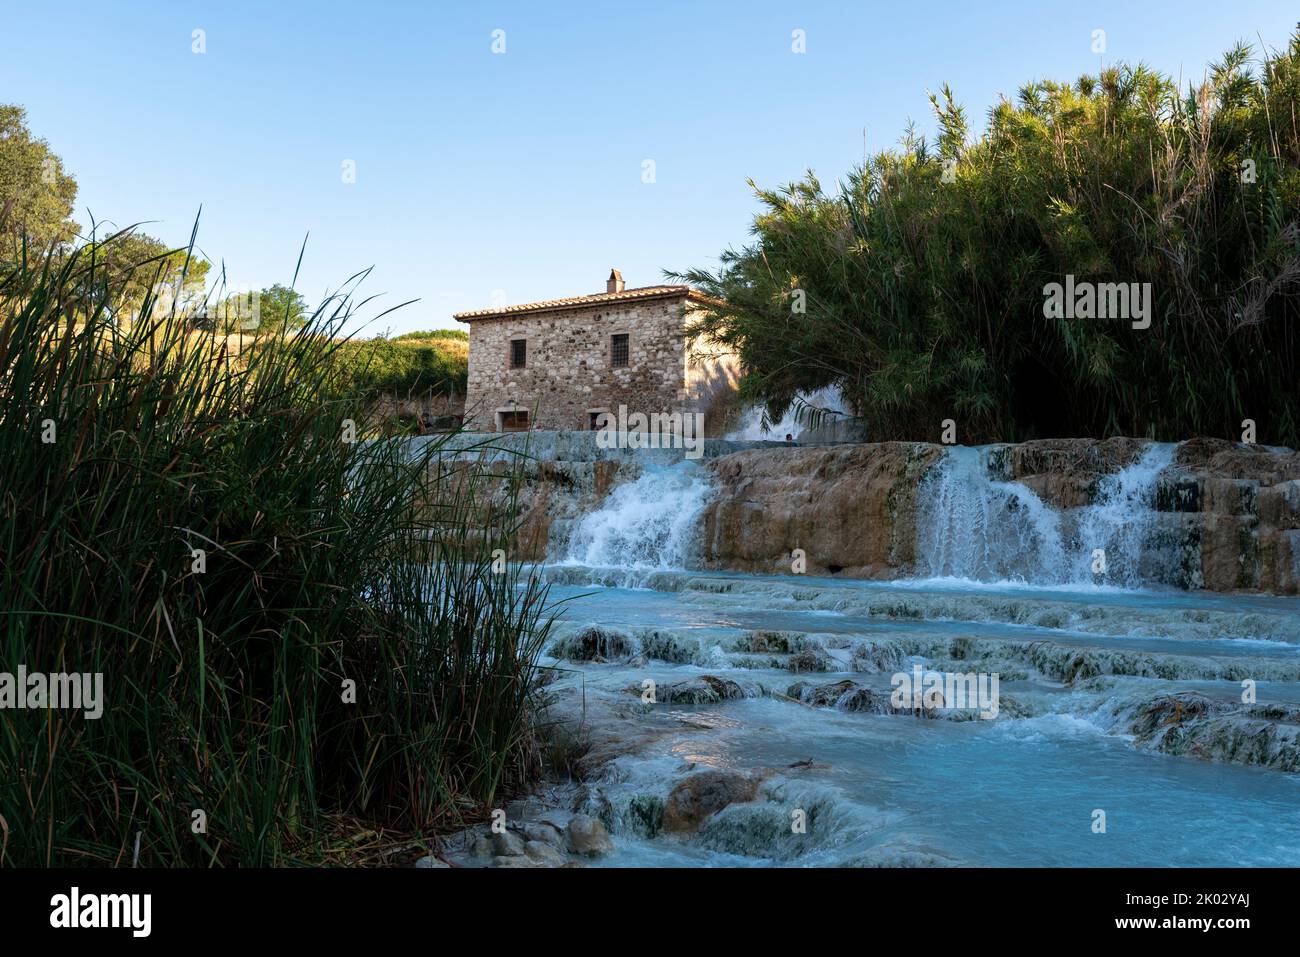 Terme di Saturnia, Cascate del Molino, waterfall, thermal spring, sulfurous thermal water, Saturnia, Grosseto province, Tuscany, Italy Stock Photo